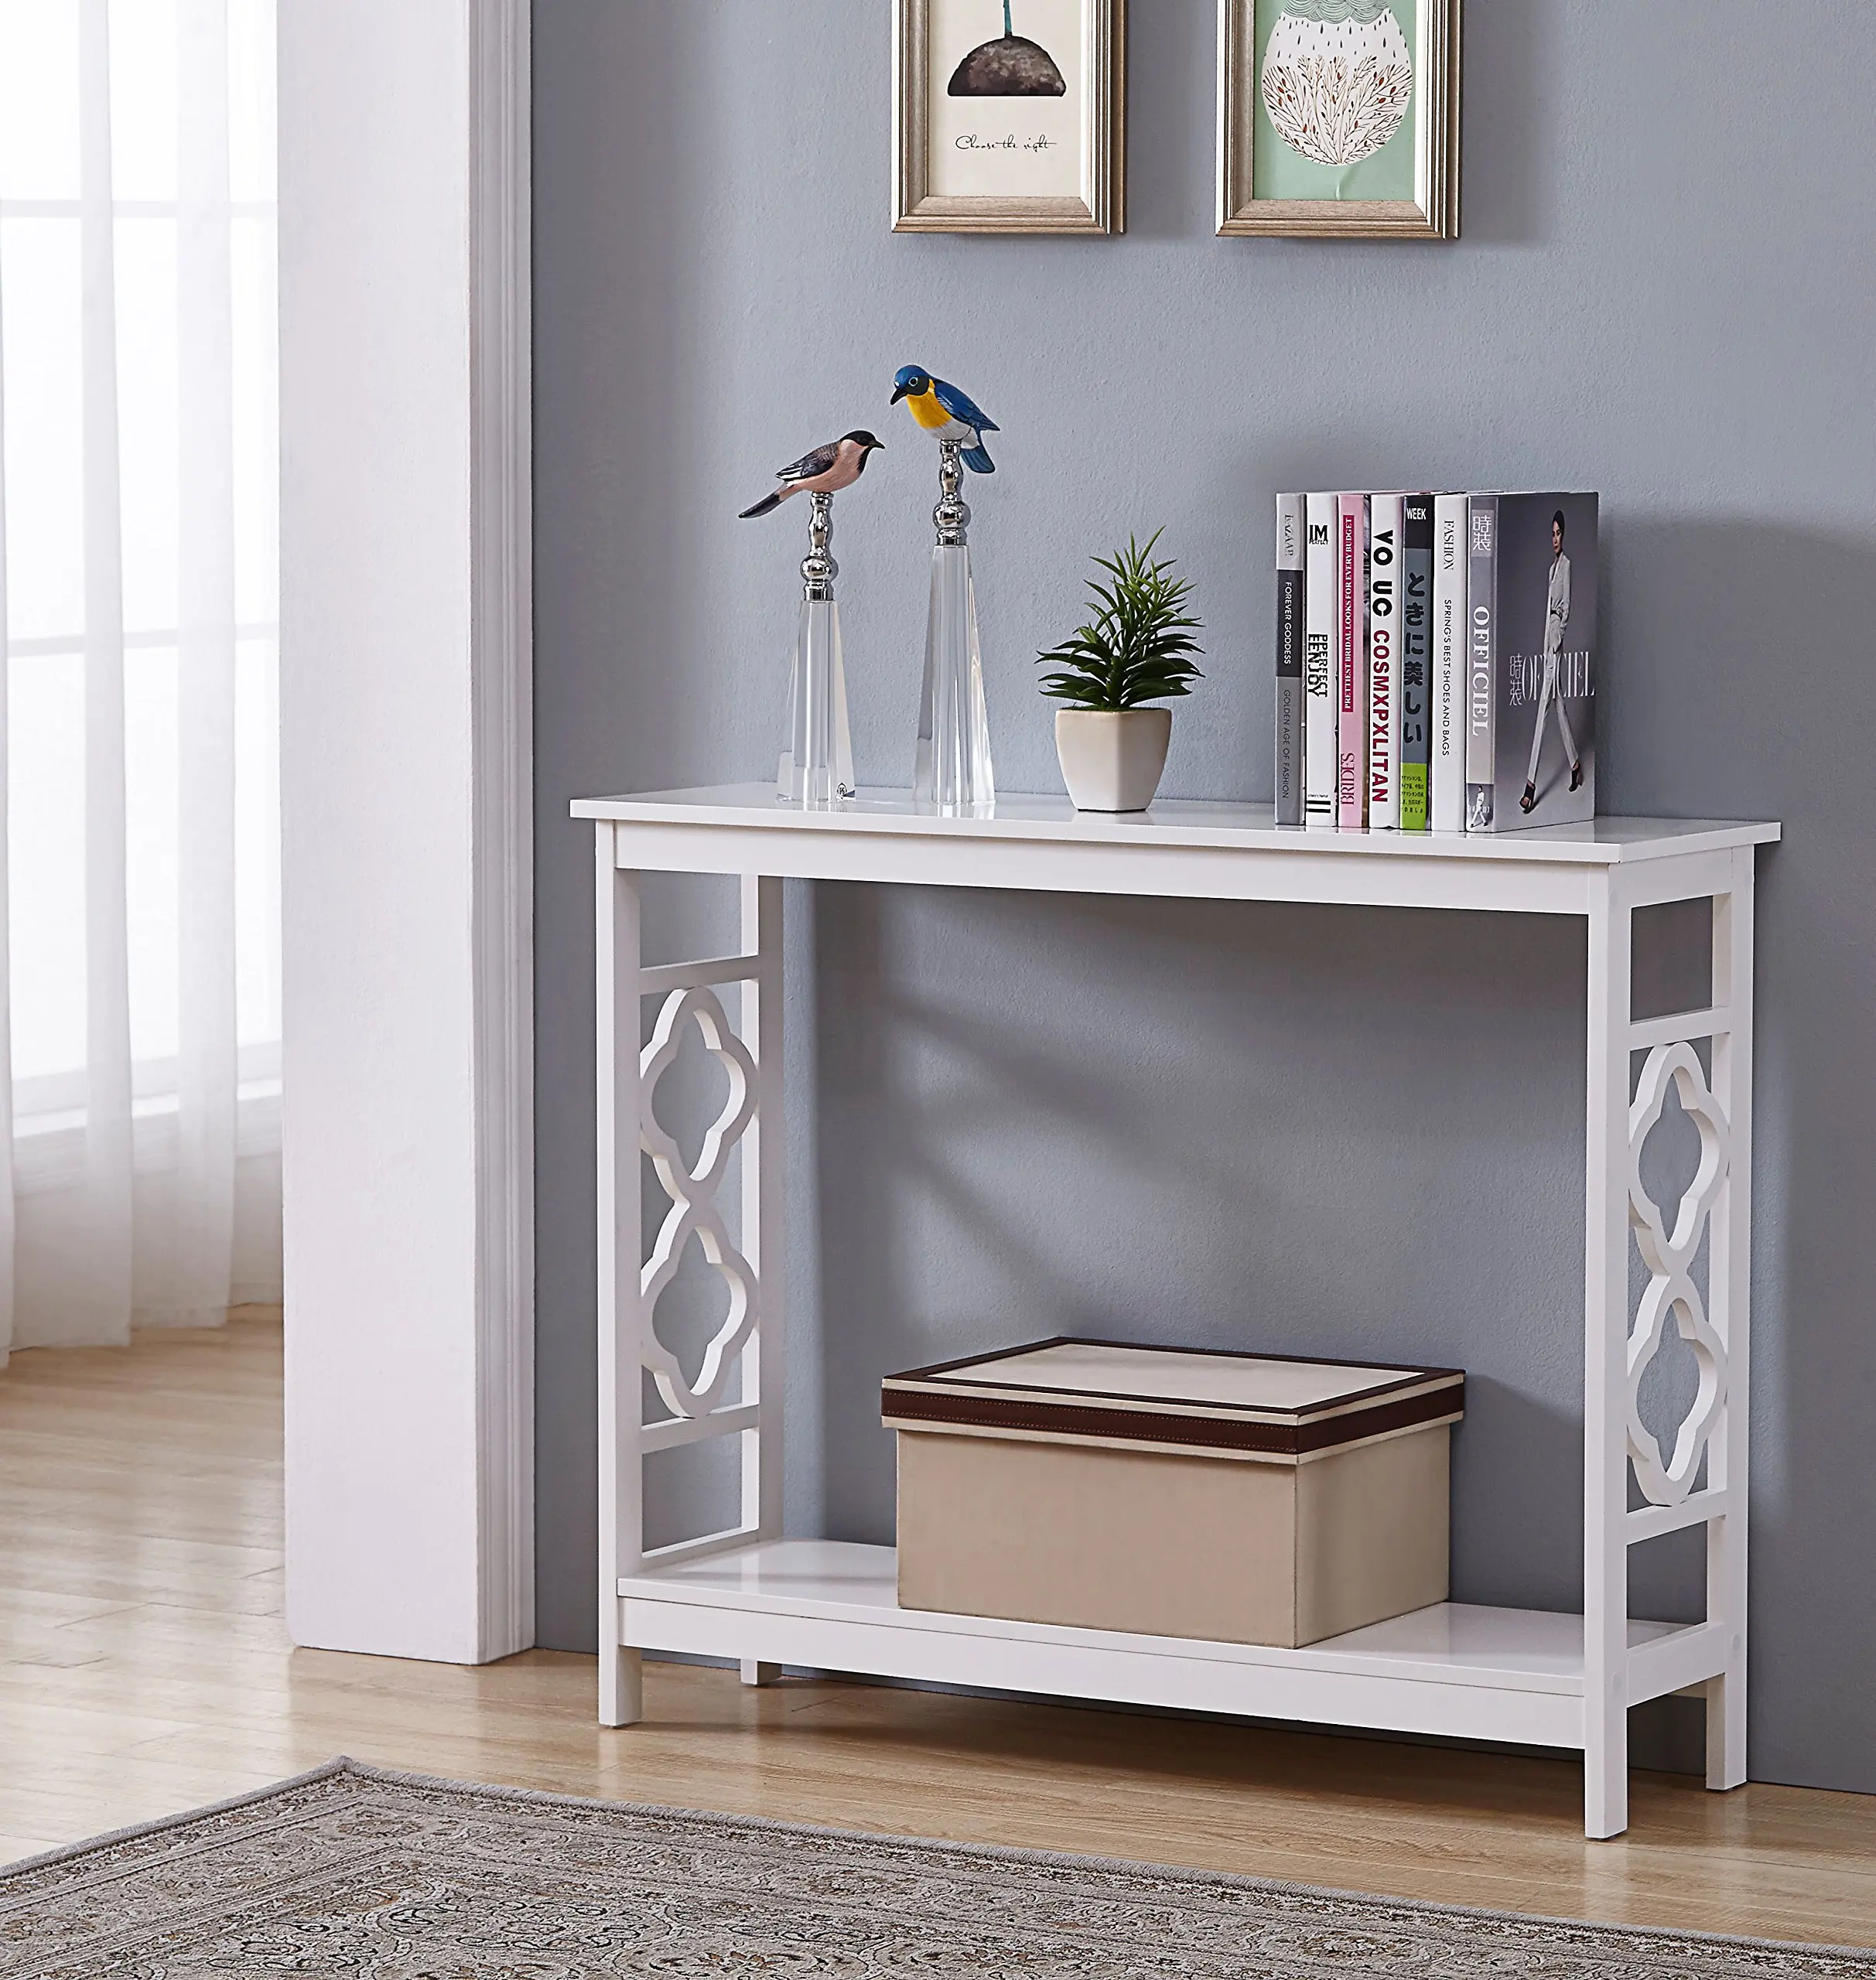 end tables with bookshelves